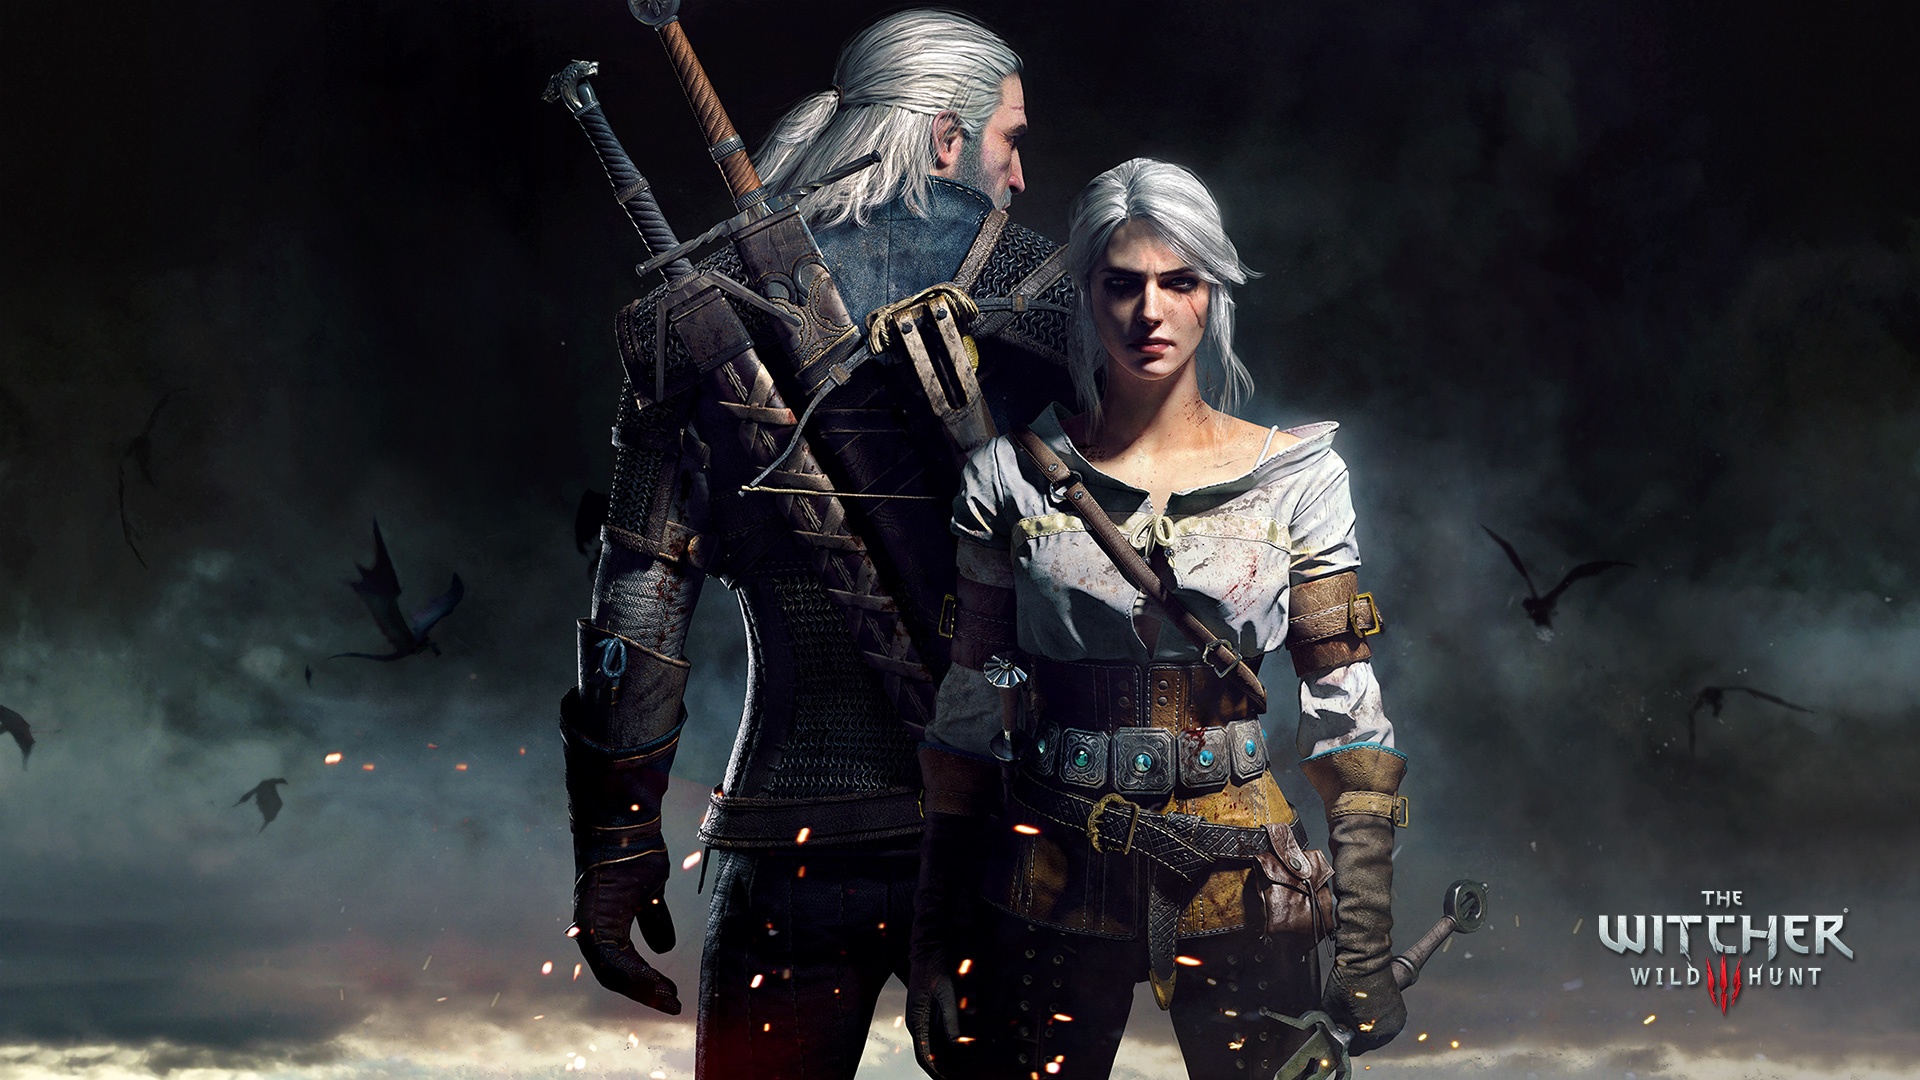 The Witcher TV series coming to Netflix